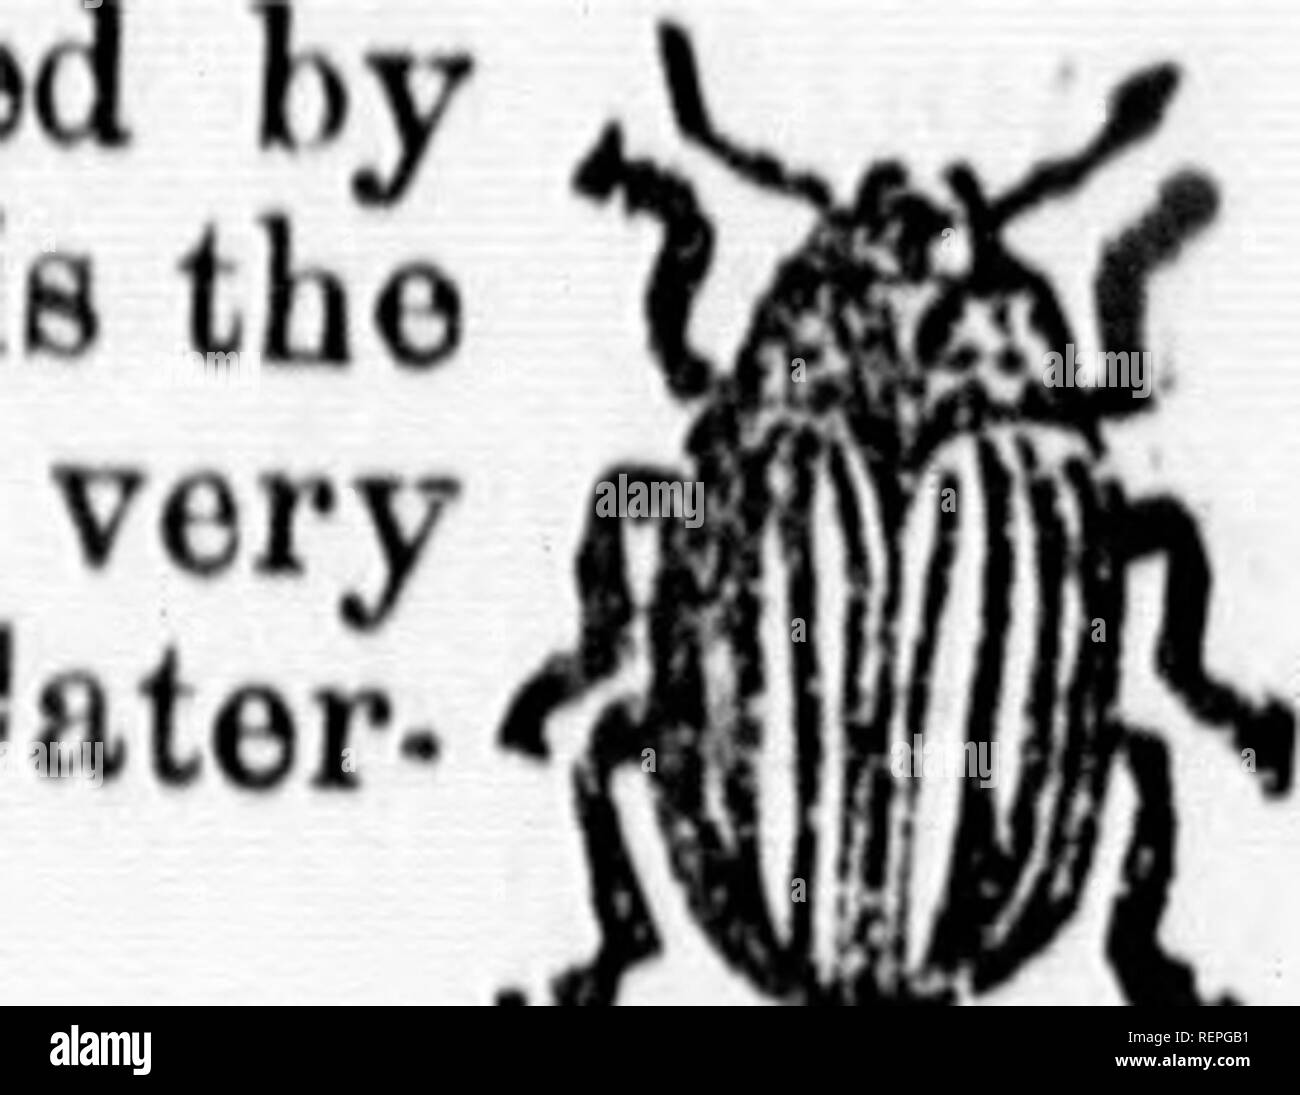 . Report of the entomologist (James Fletcher, F.R.S.C.), 1885 [microform]. Insect pests; Insectes nuisibles. latter are most own u.so. As lacoousHpocios, bocauso thoy. ppoar Fig. 21. bod is . A large food the amount of ;o areas under insects which ich had provi- in numbers so ranee to agri- fliance at the is bjetio was of Colorado, ide family, to trerae rarity, ho inc^ividual loricii, in his ['rom the east, which it has 10 not thinlf, be past, lor a 3k. As soon endable zeal, 11 its stages, ;ed in every successfully illow of its ern Canada; Iways check i03t as much rtant insecti- 5t internally^ Stock Photo